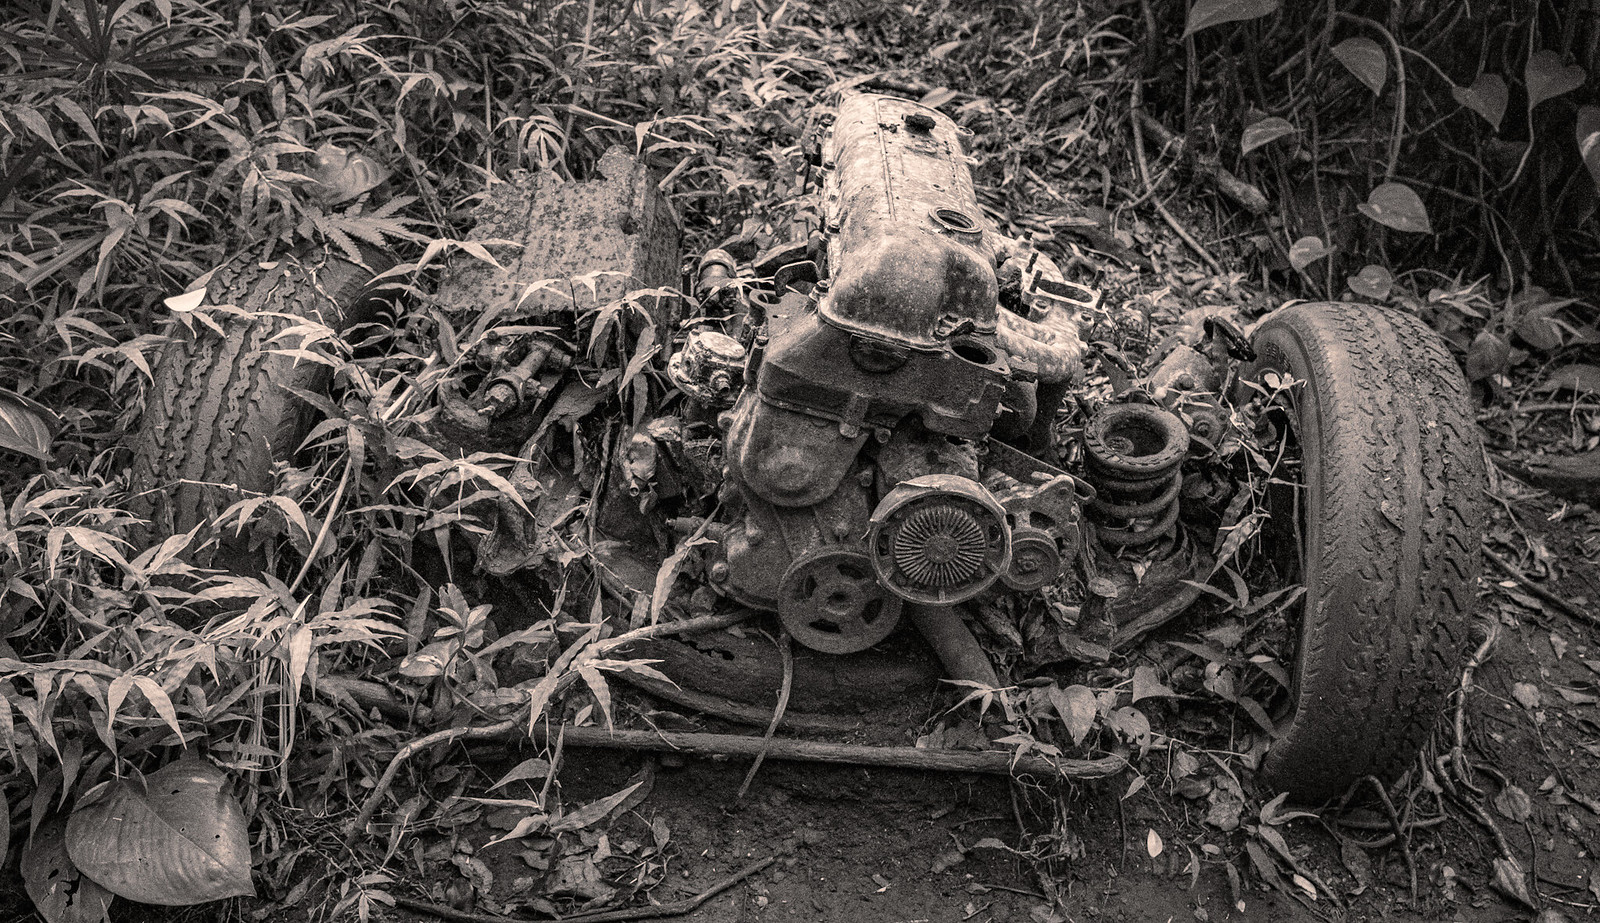 Jungle Junker, Engine on the Trail to Ho'opi Falls